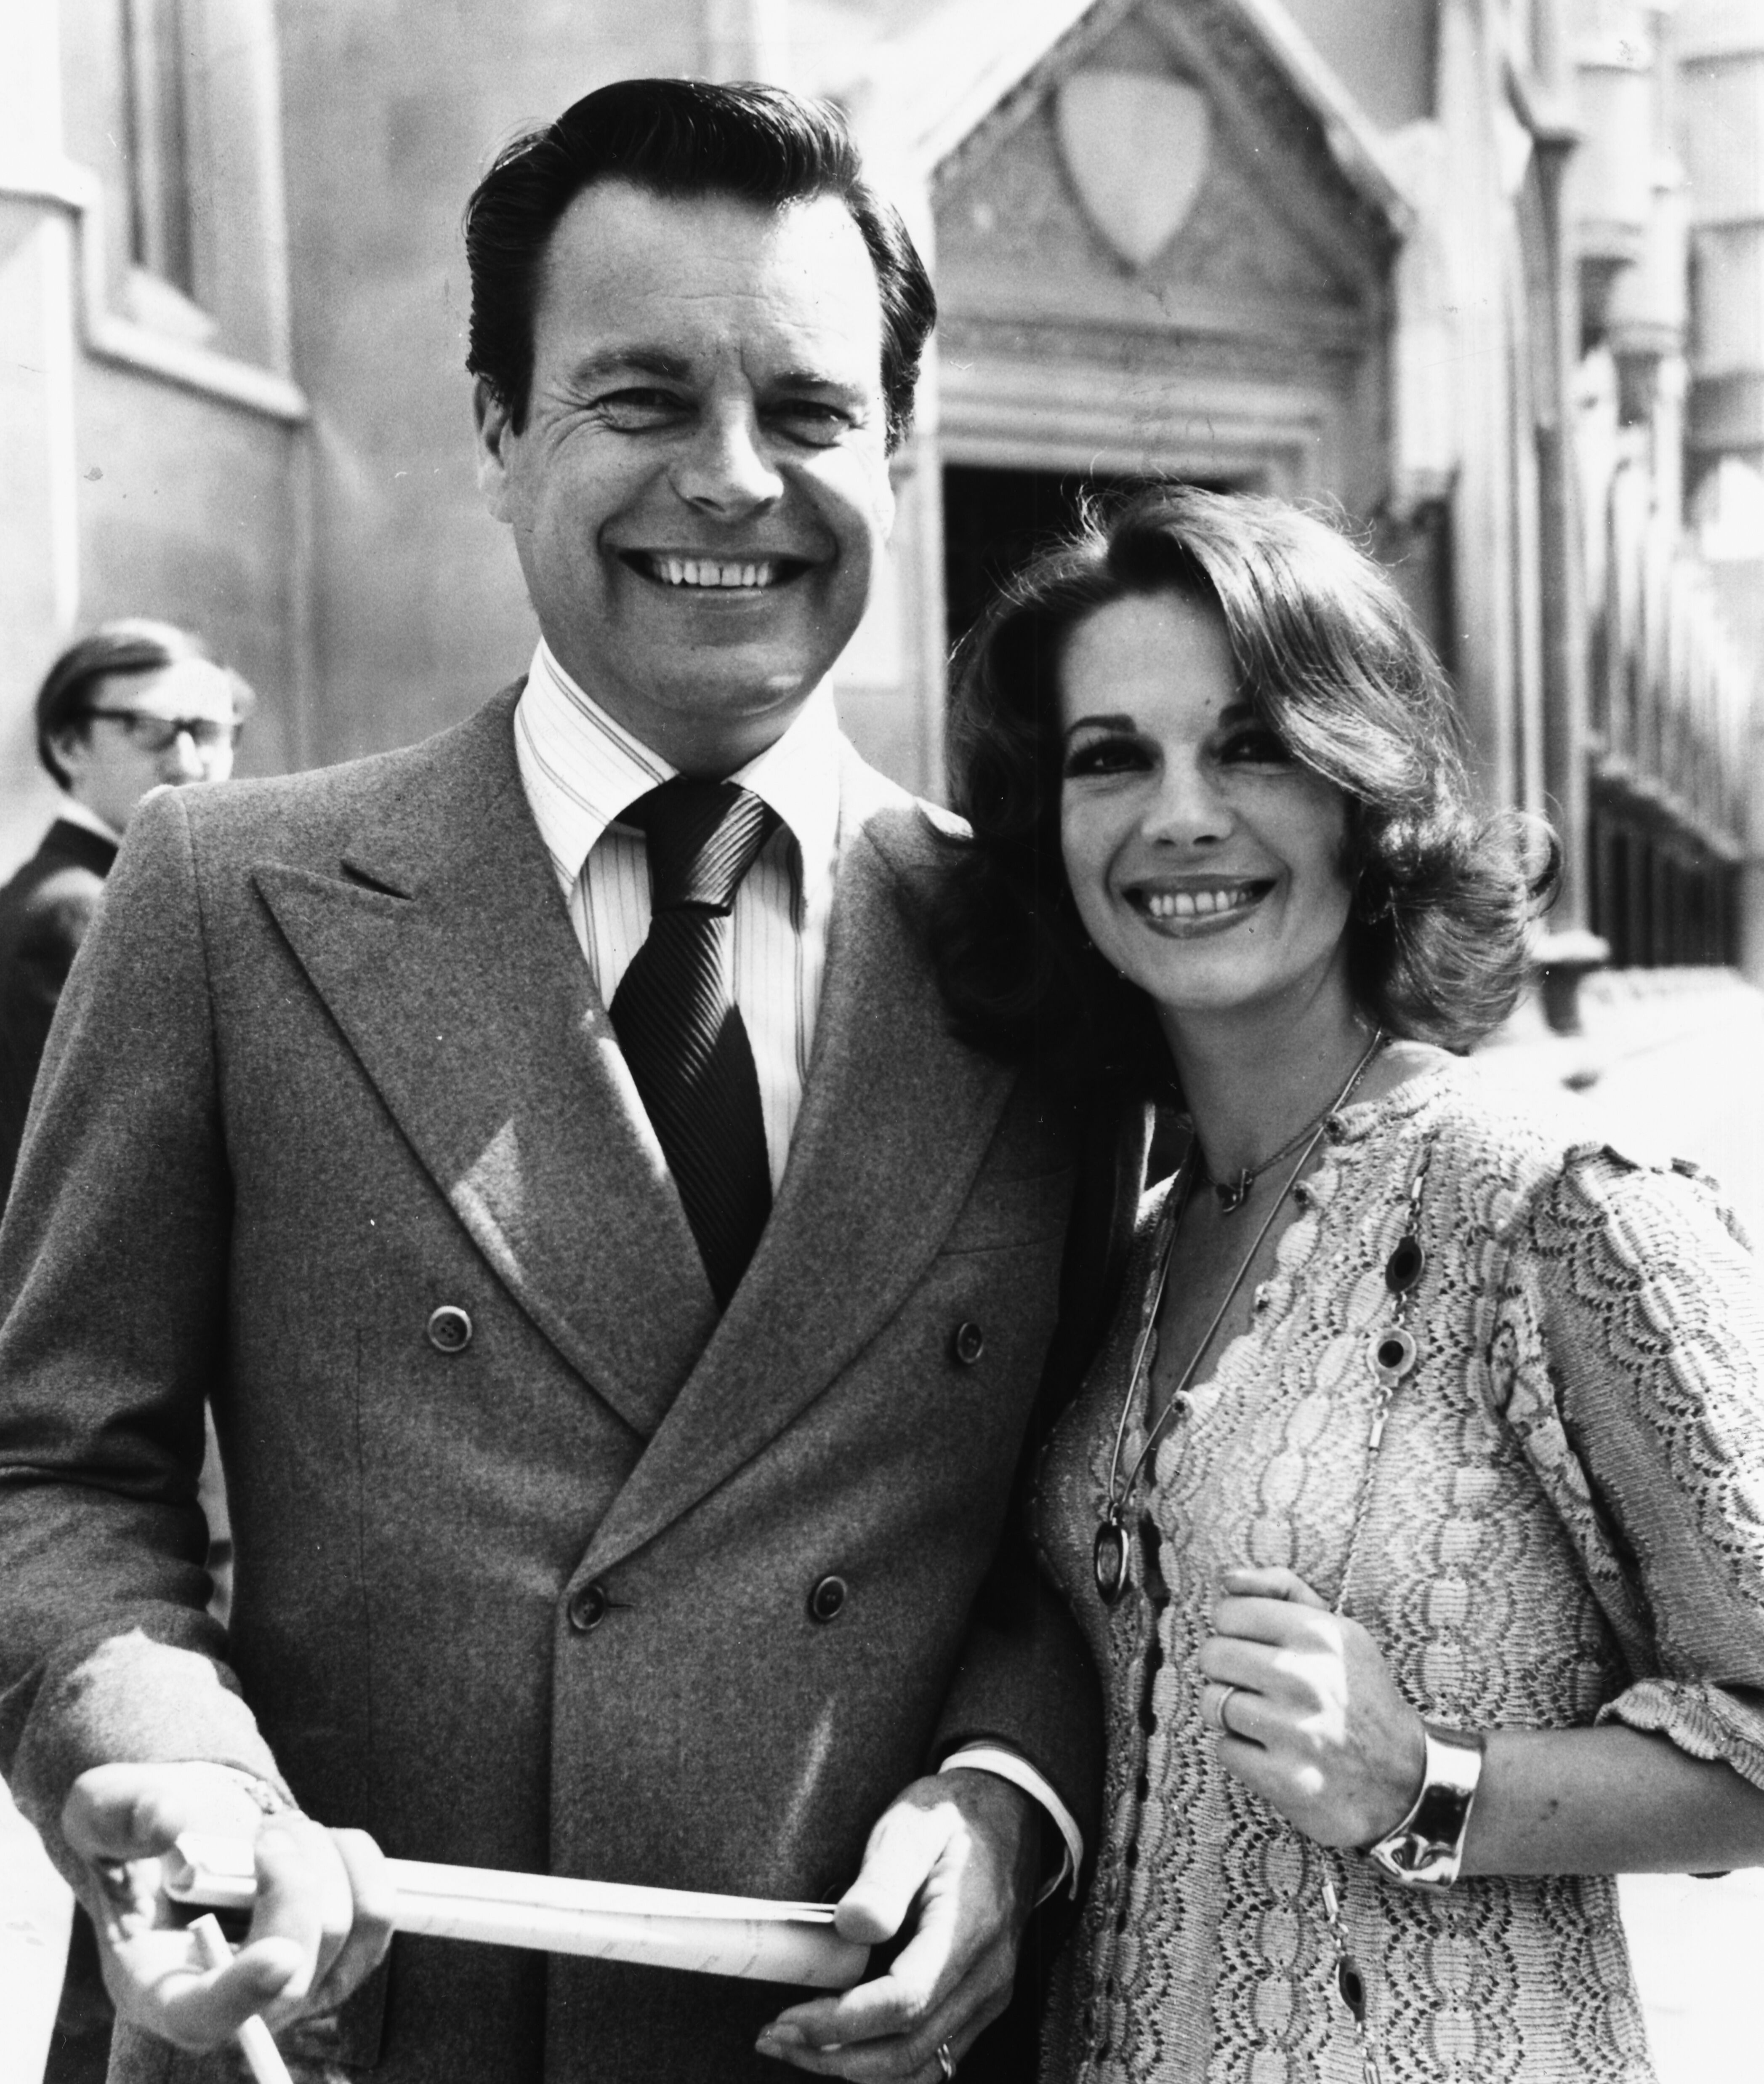  Natalie Wood and Robert Wagner in London in 1976. | Photo: Getty Images